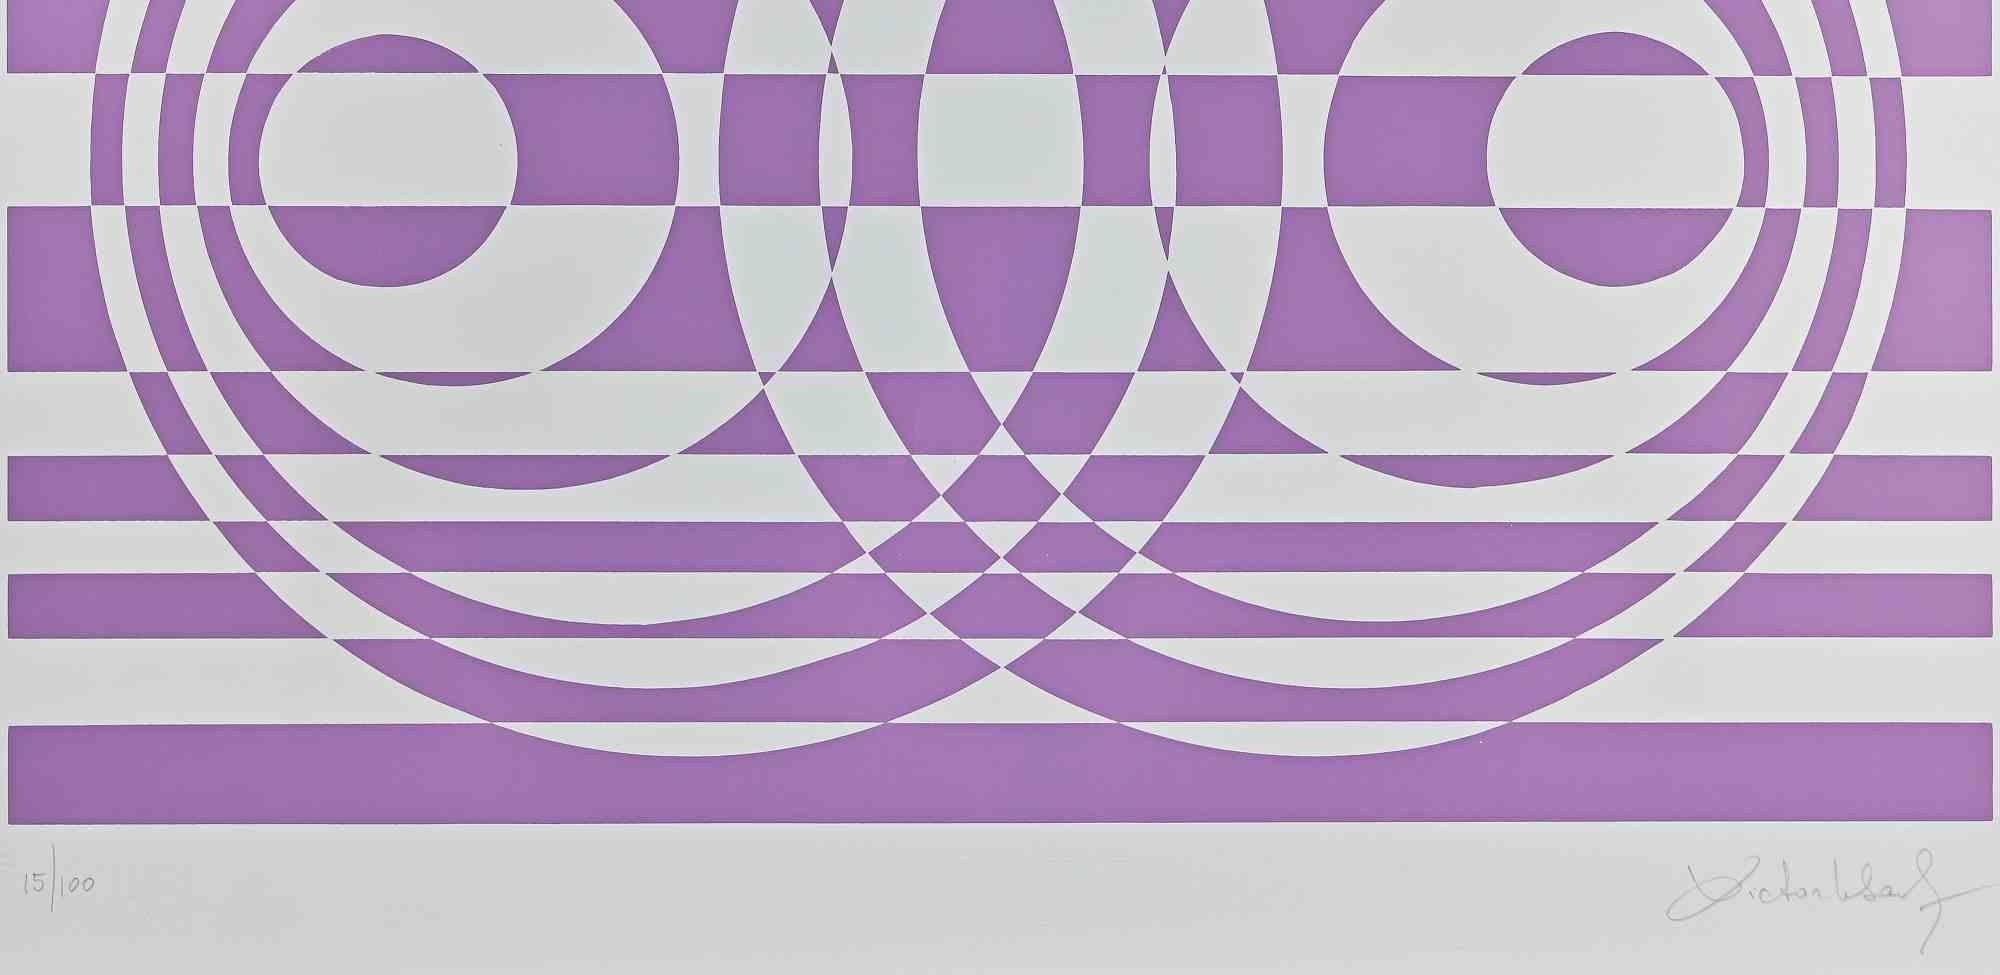 Abstract composition in purple is a screenprint realized by Victor Debach in 1970s.

50x70 cm.

Edition 15/100

Handsigned in pencil on the right lower margin.

Excellent conditions.